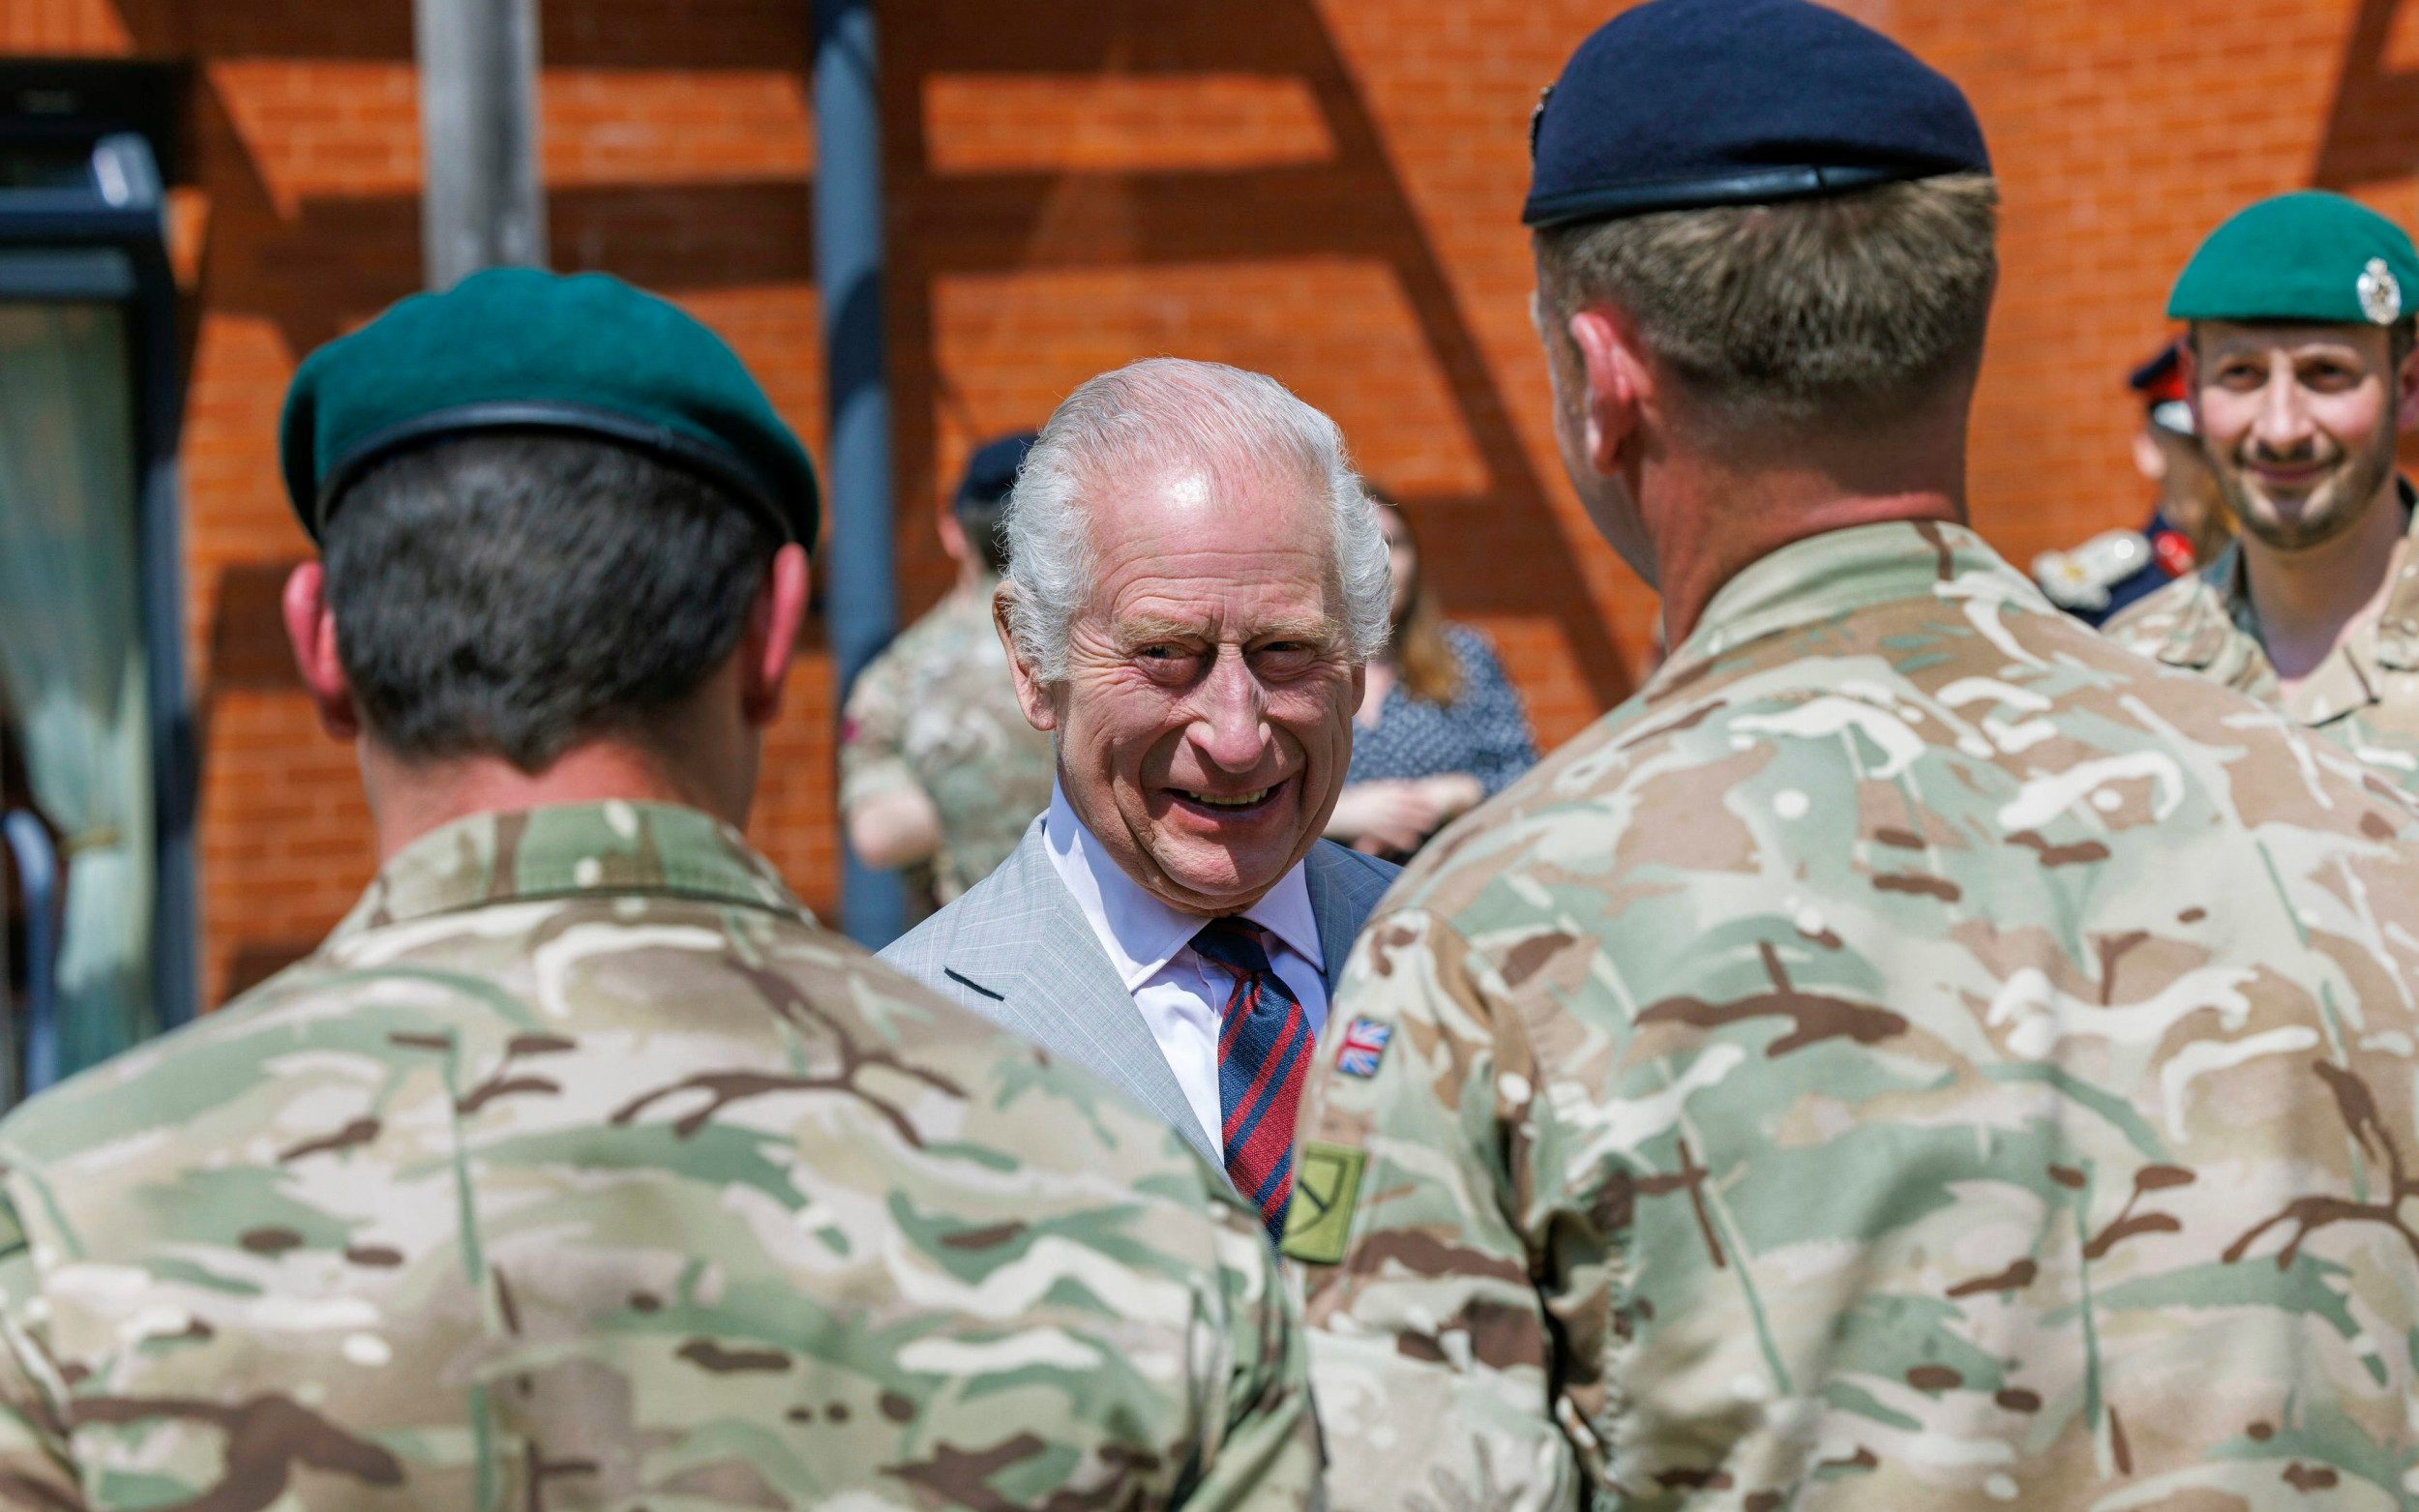 king ‘glad to be out of cage’ in first military visit since cancer diagnosis